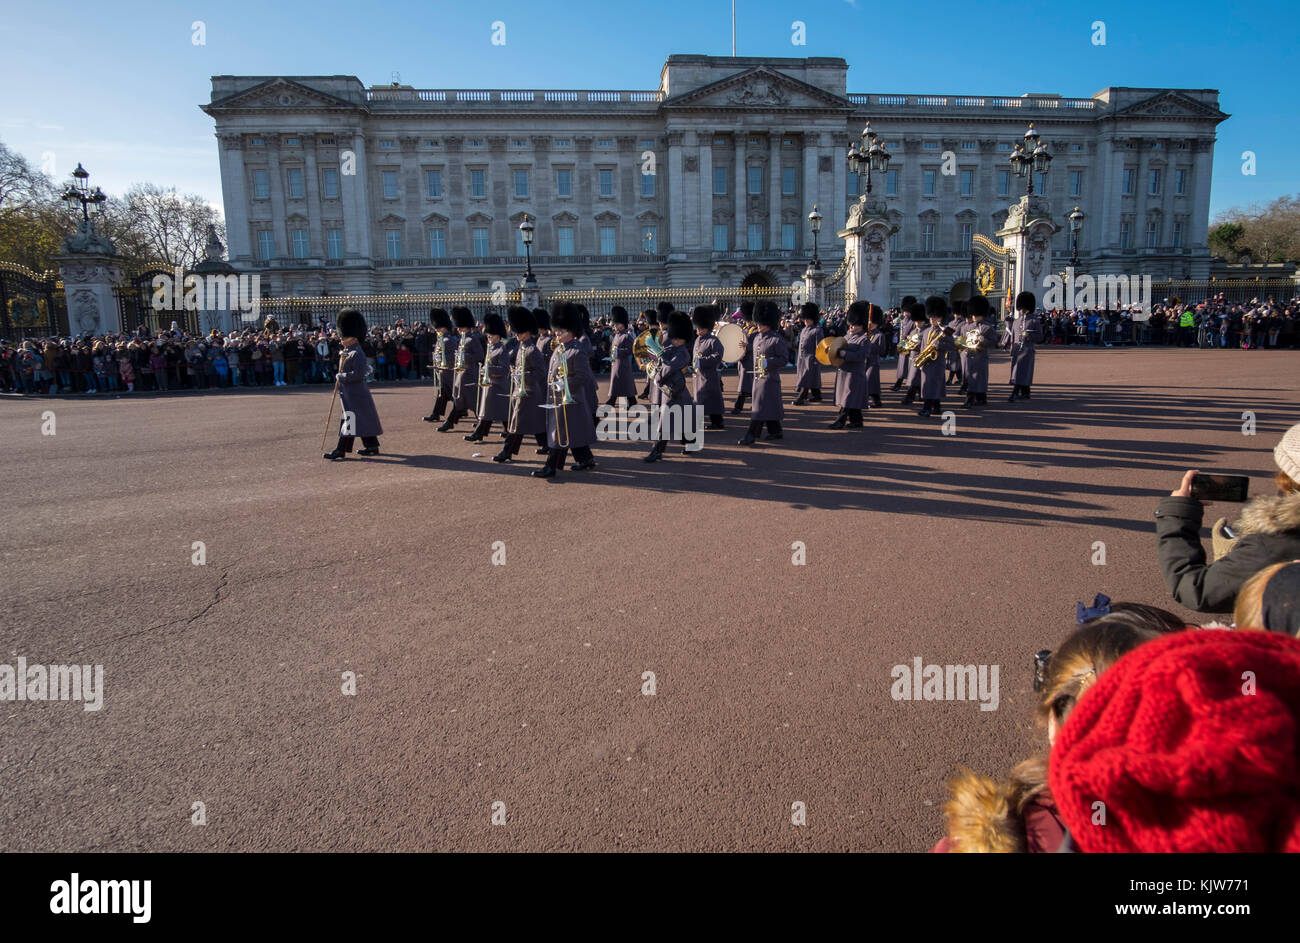 Buckingham Palace, London, UK. 26 November, 2017. In a historic first the Royal Navy form the Queen’s Guard at Buckingham Palace with musical support from Band of HM Royal Marines Scotland and Band of the Irish Guards, the first time in 357 years the ceremony has not been carried out by the Army‘s Household Division Foot Guards Regiments. Large crowds turn out on a cold and sunny winters day to watch the ceremony. Credit: Malcolm Park/Alamy Live News. Stock Photo